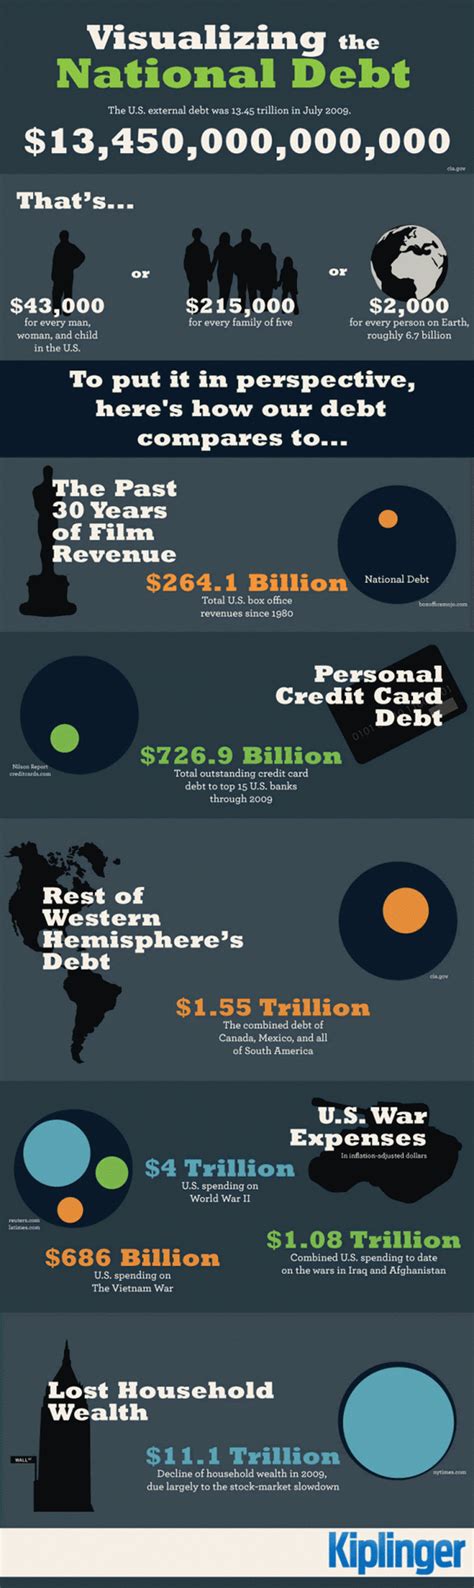 Visualizing The National Debt Infographic